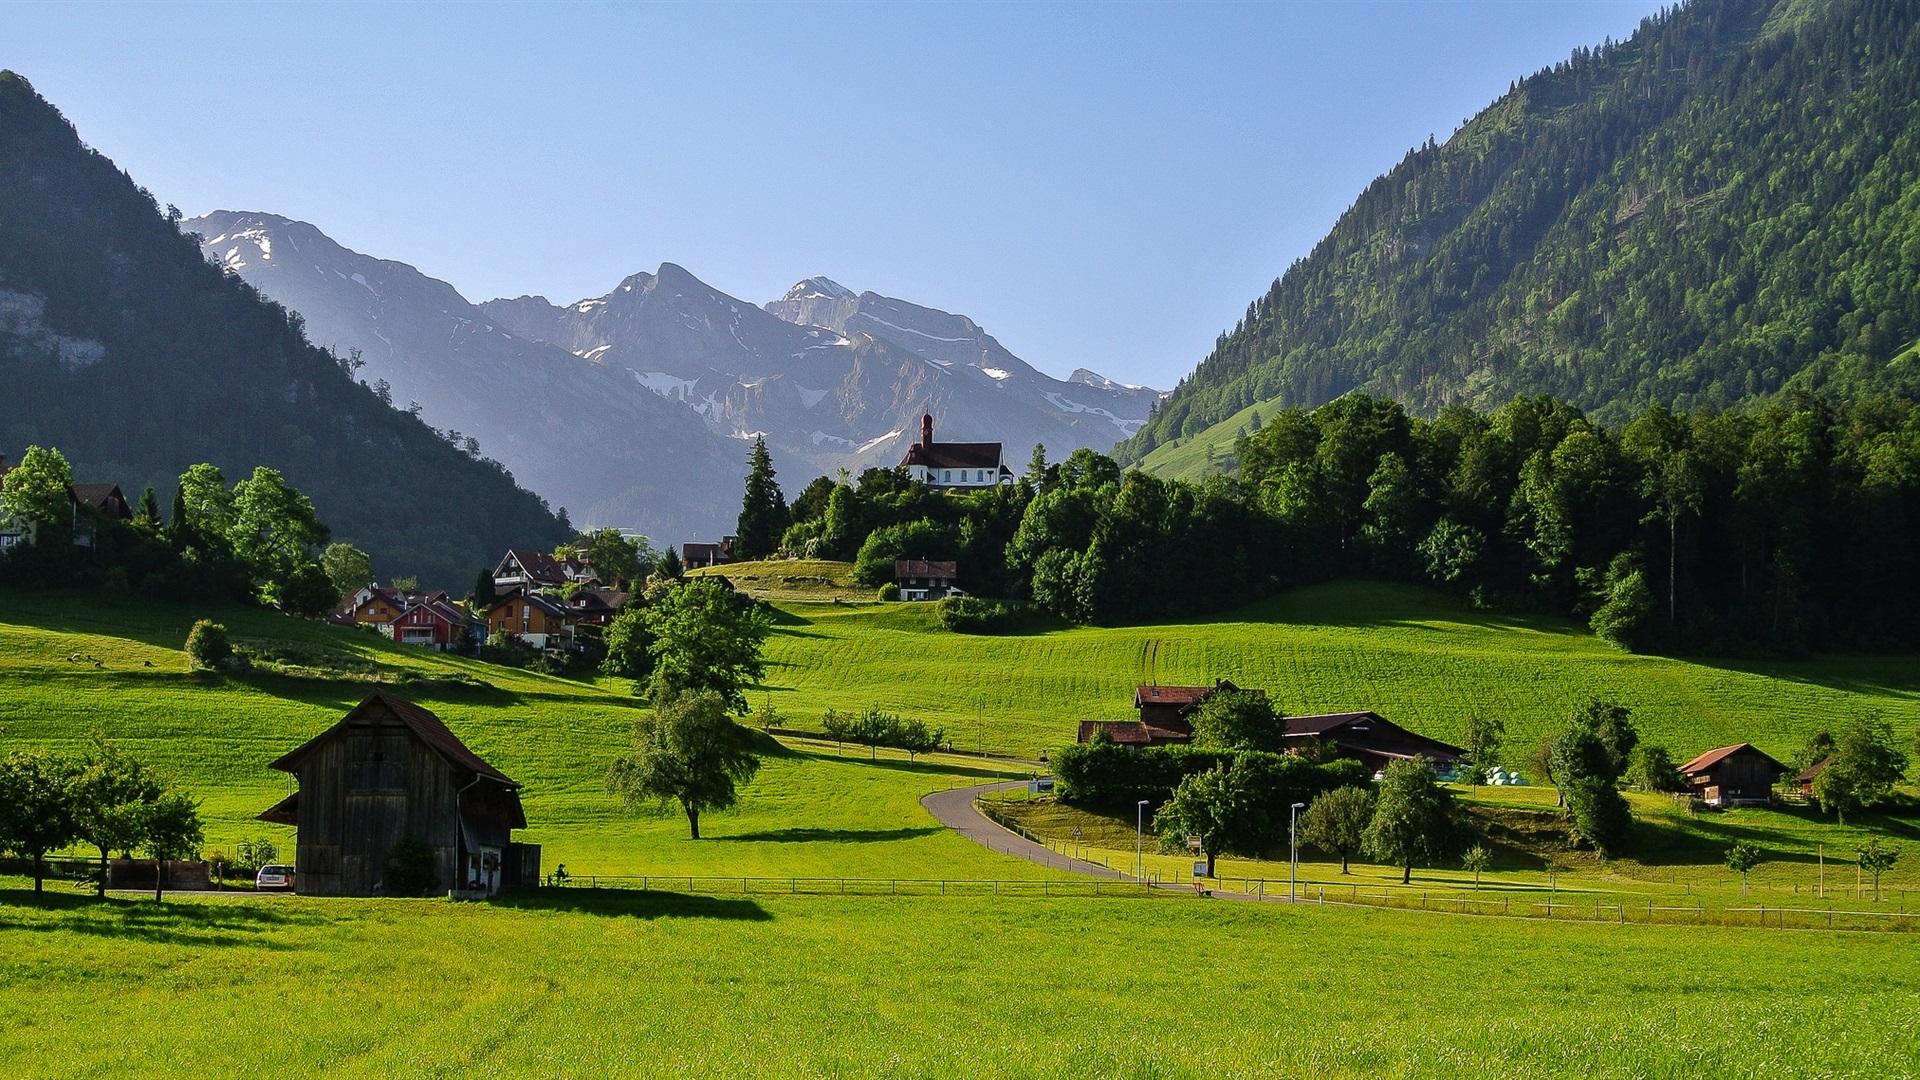 Switzerland, mountains, Alps, valley, grass, road, house, trees